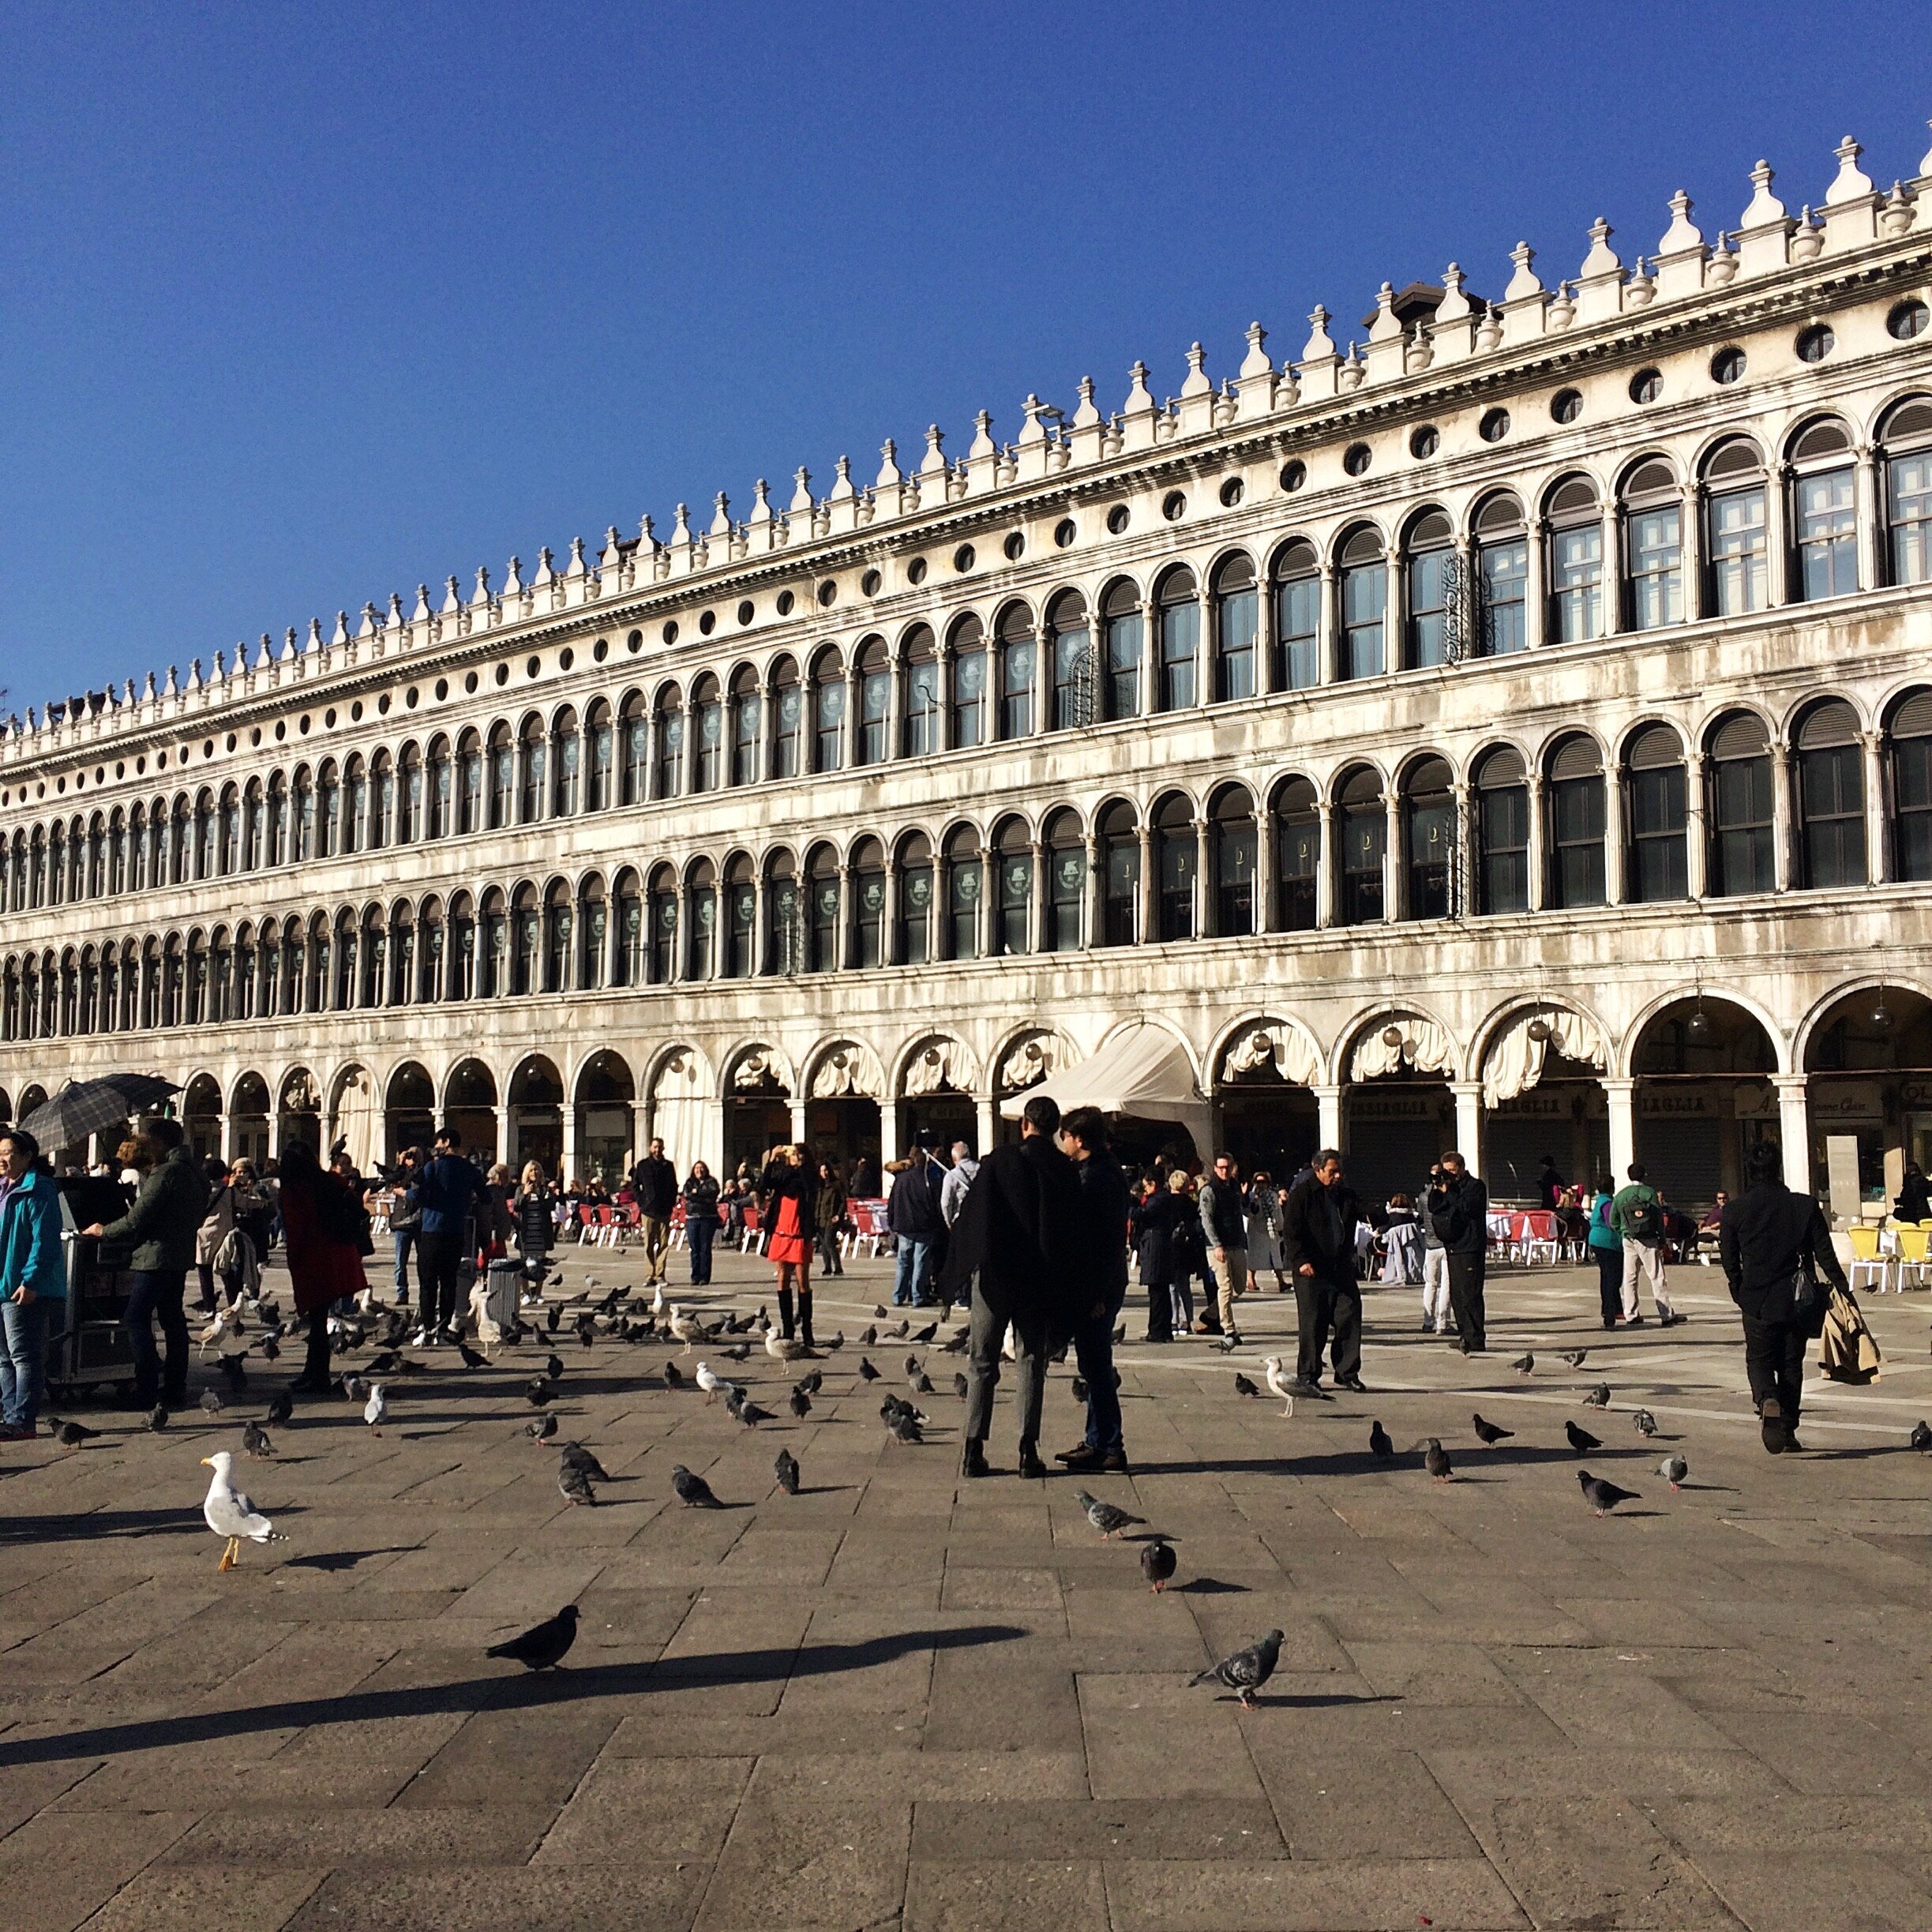 Tourists and pigeons roam the famed spaces | EAT.PRAY.MOVE Retreats | Venice, Italy 